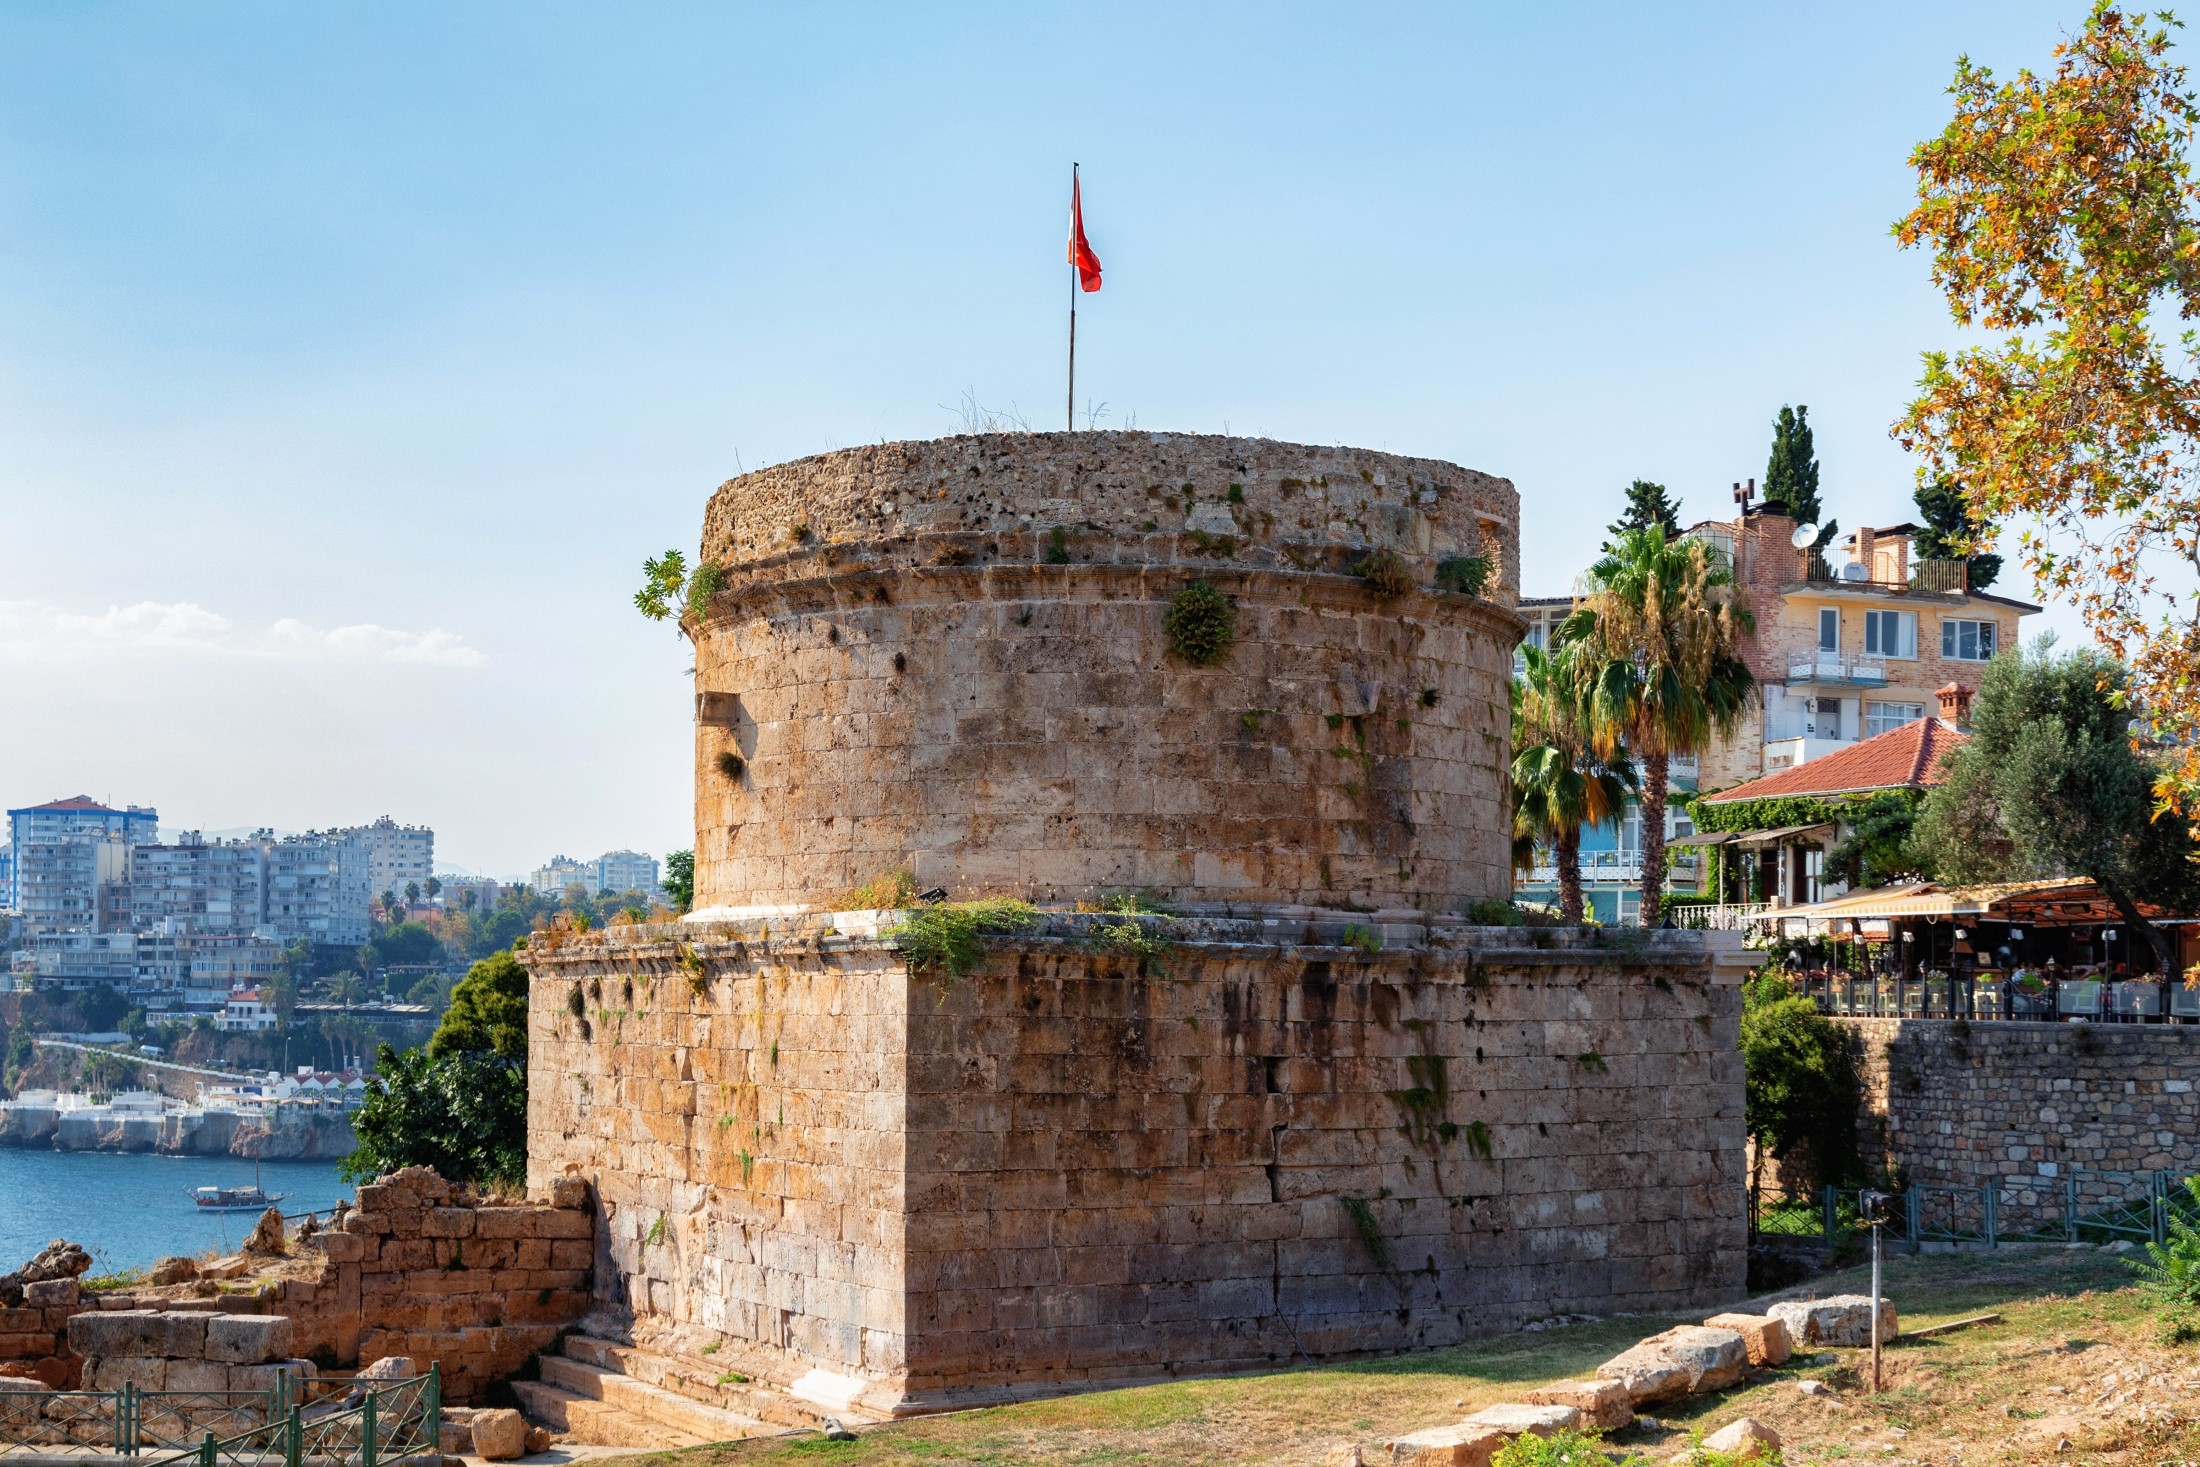 View of the Hıdırlık Tower in Antalya, Turkey. It is believed that the ruling Roman Empire built it in the second century CE. It has since been used as a fortification or a lighthouse.